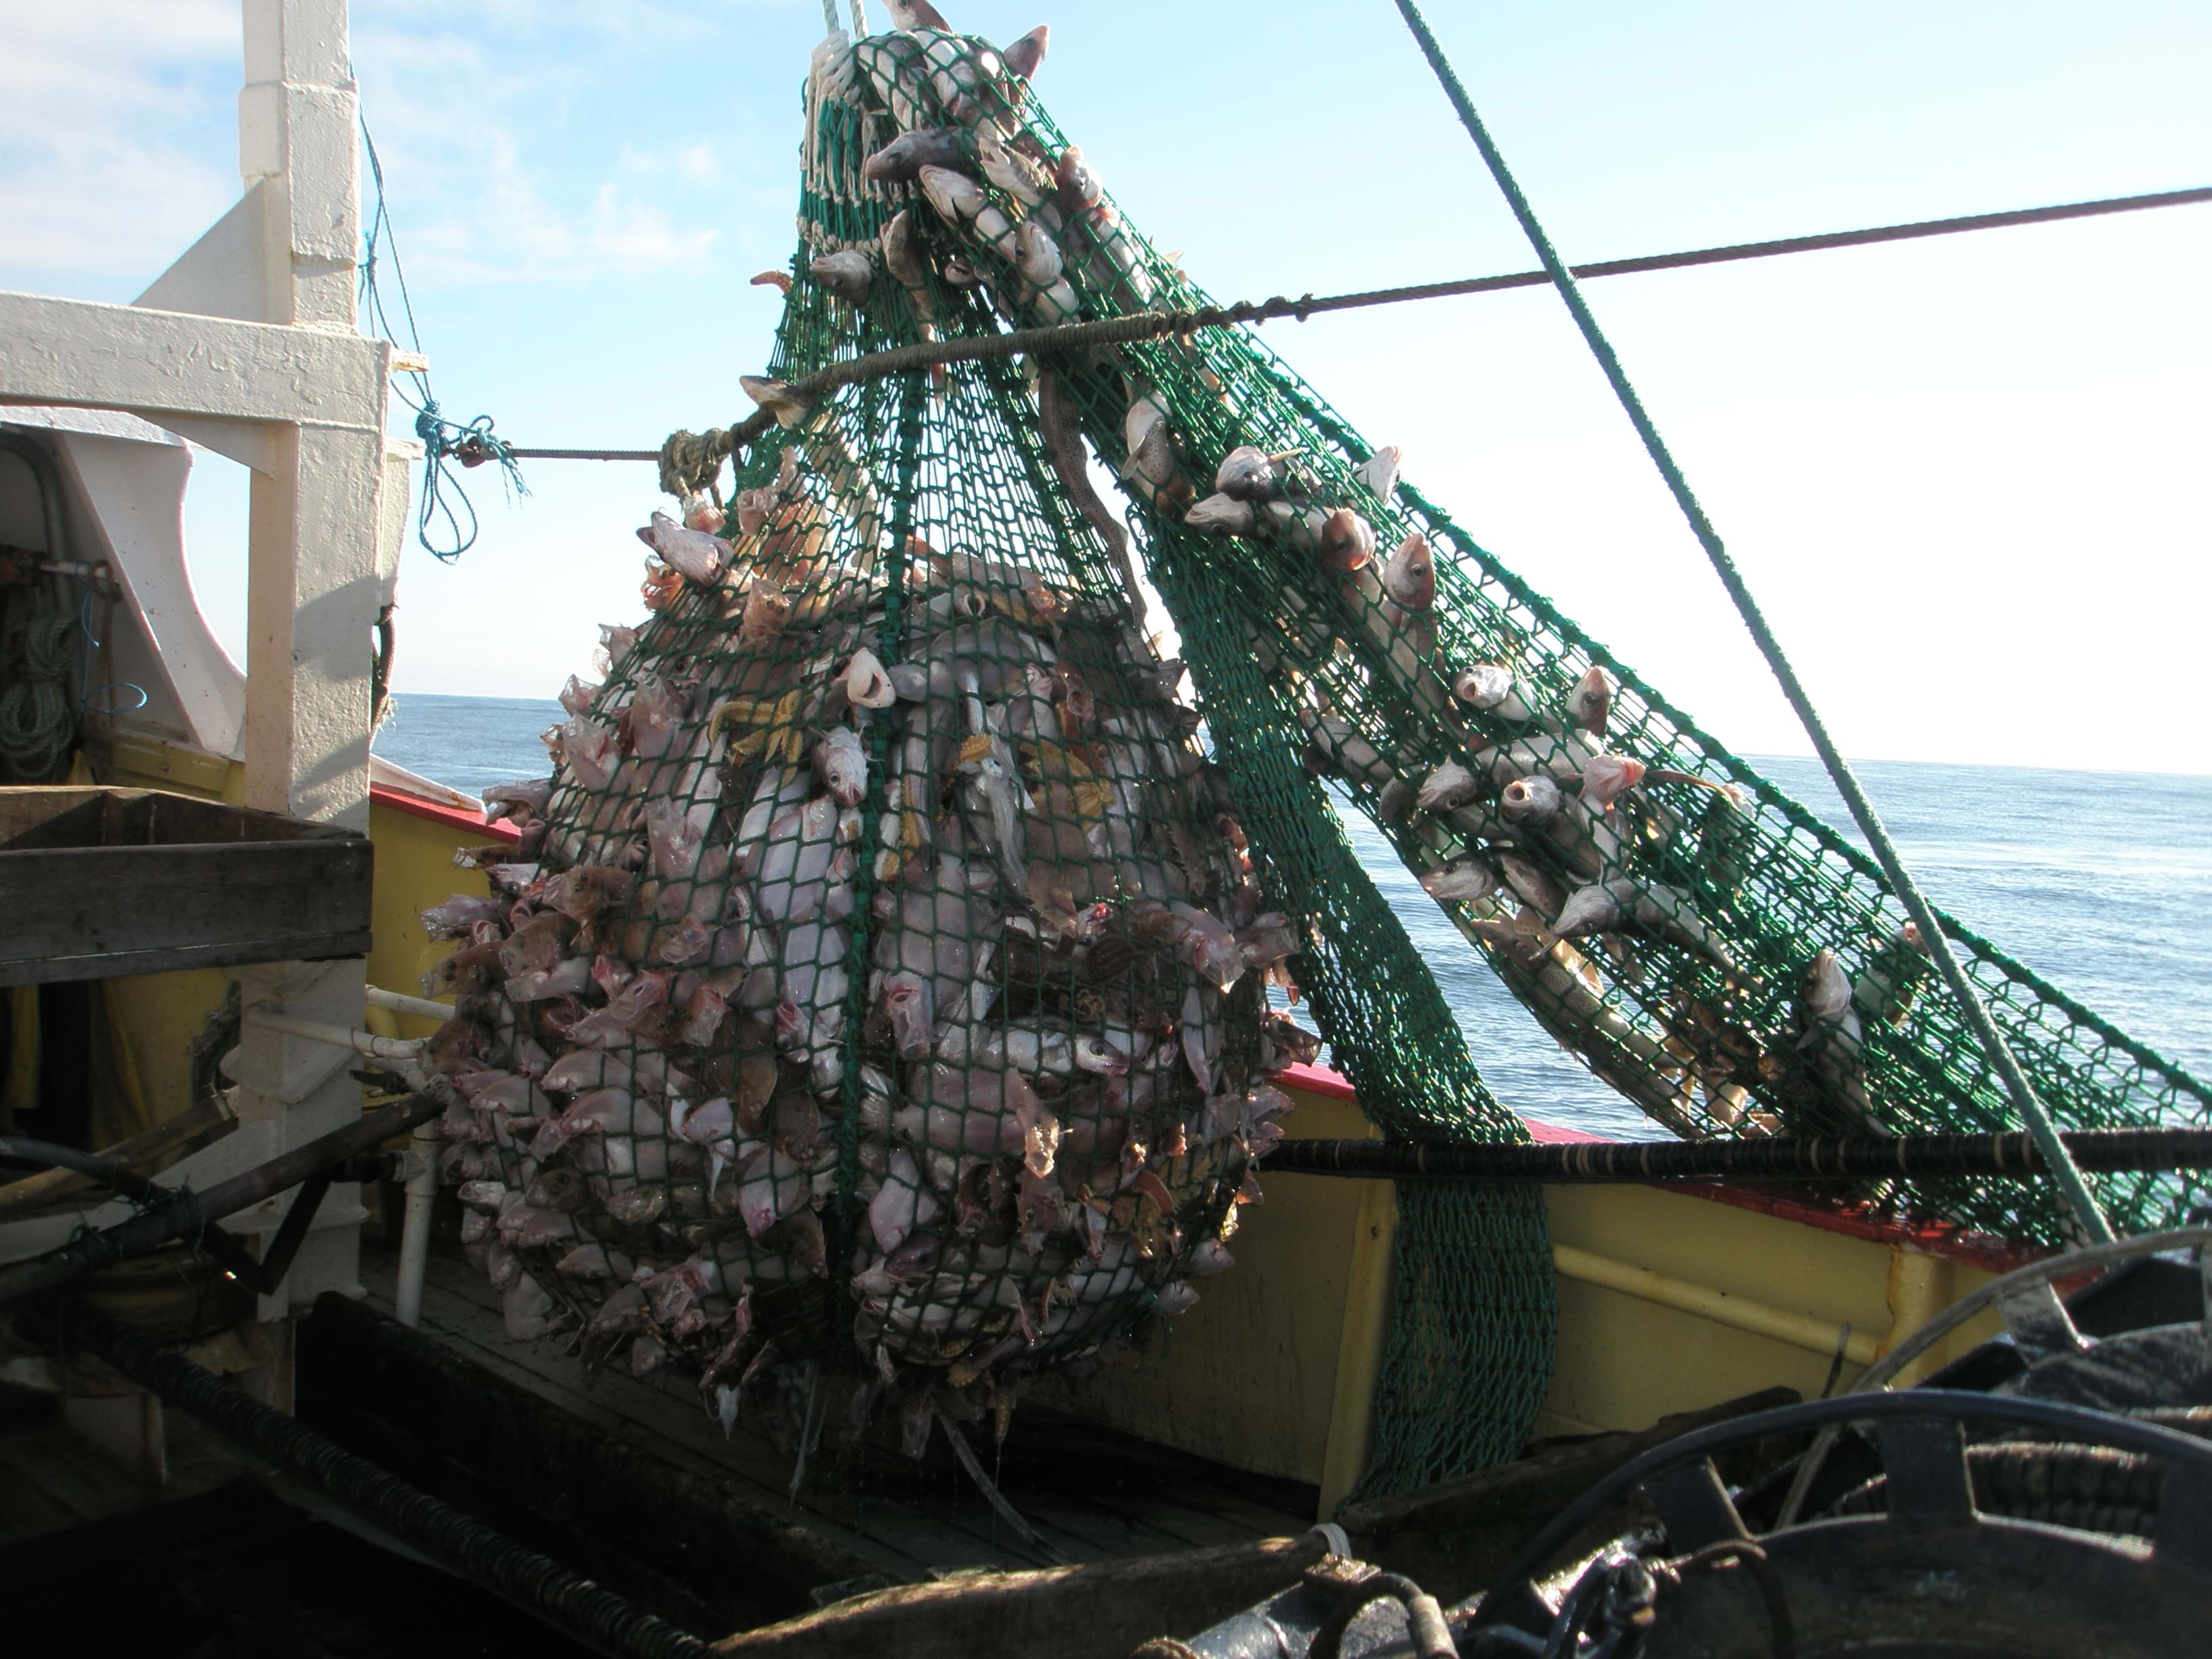 A large 4 panel square mesh cod end fishing net being emptied on board the vessel's deck at sea